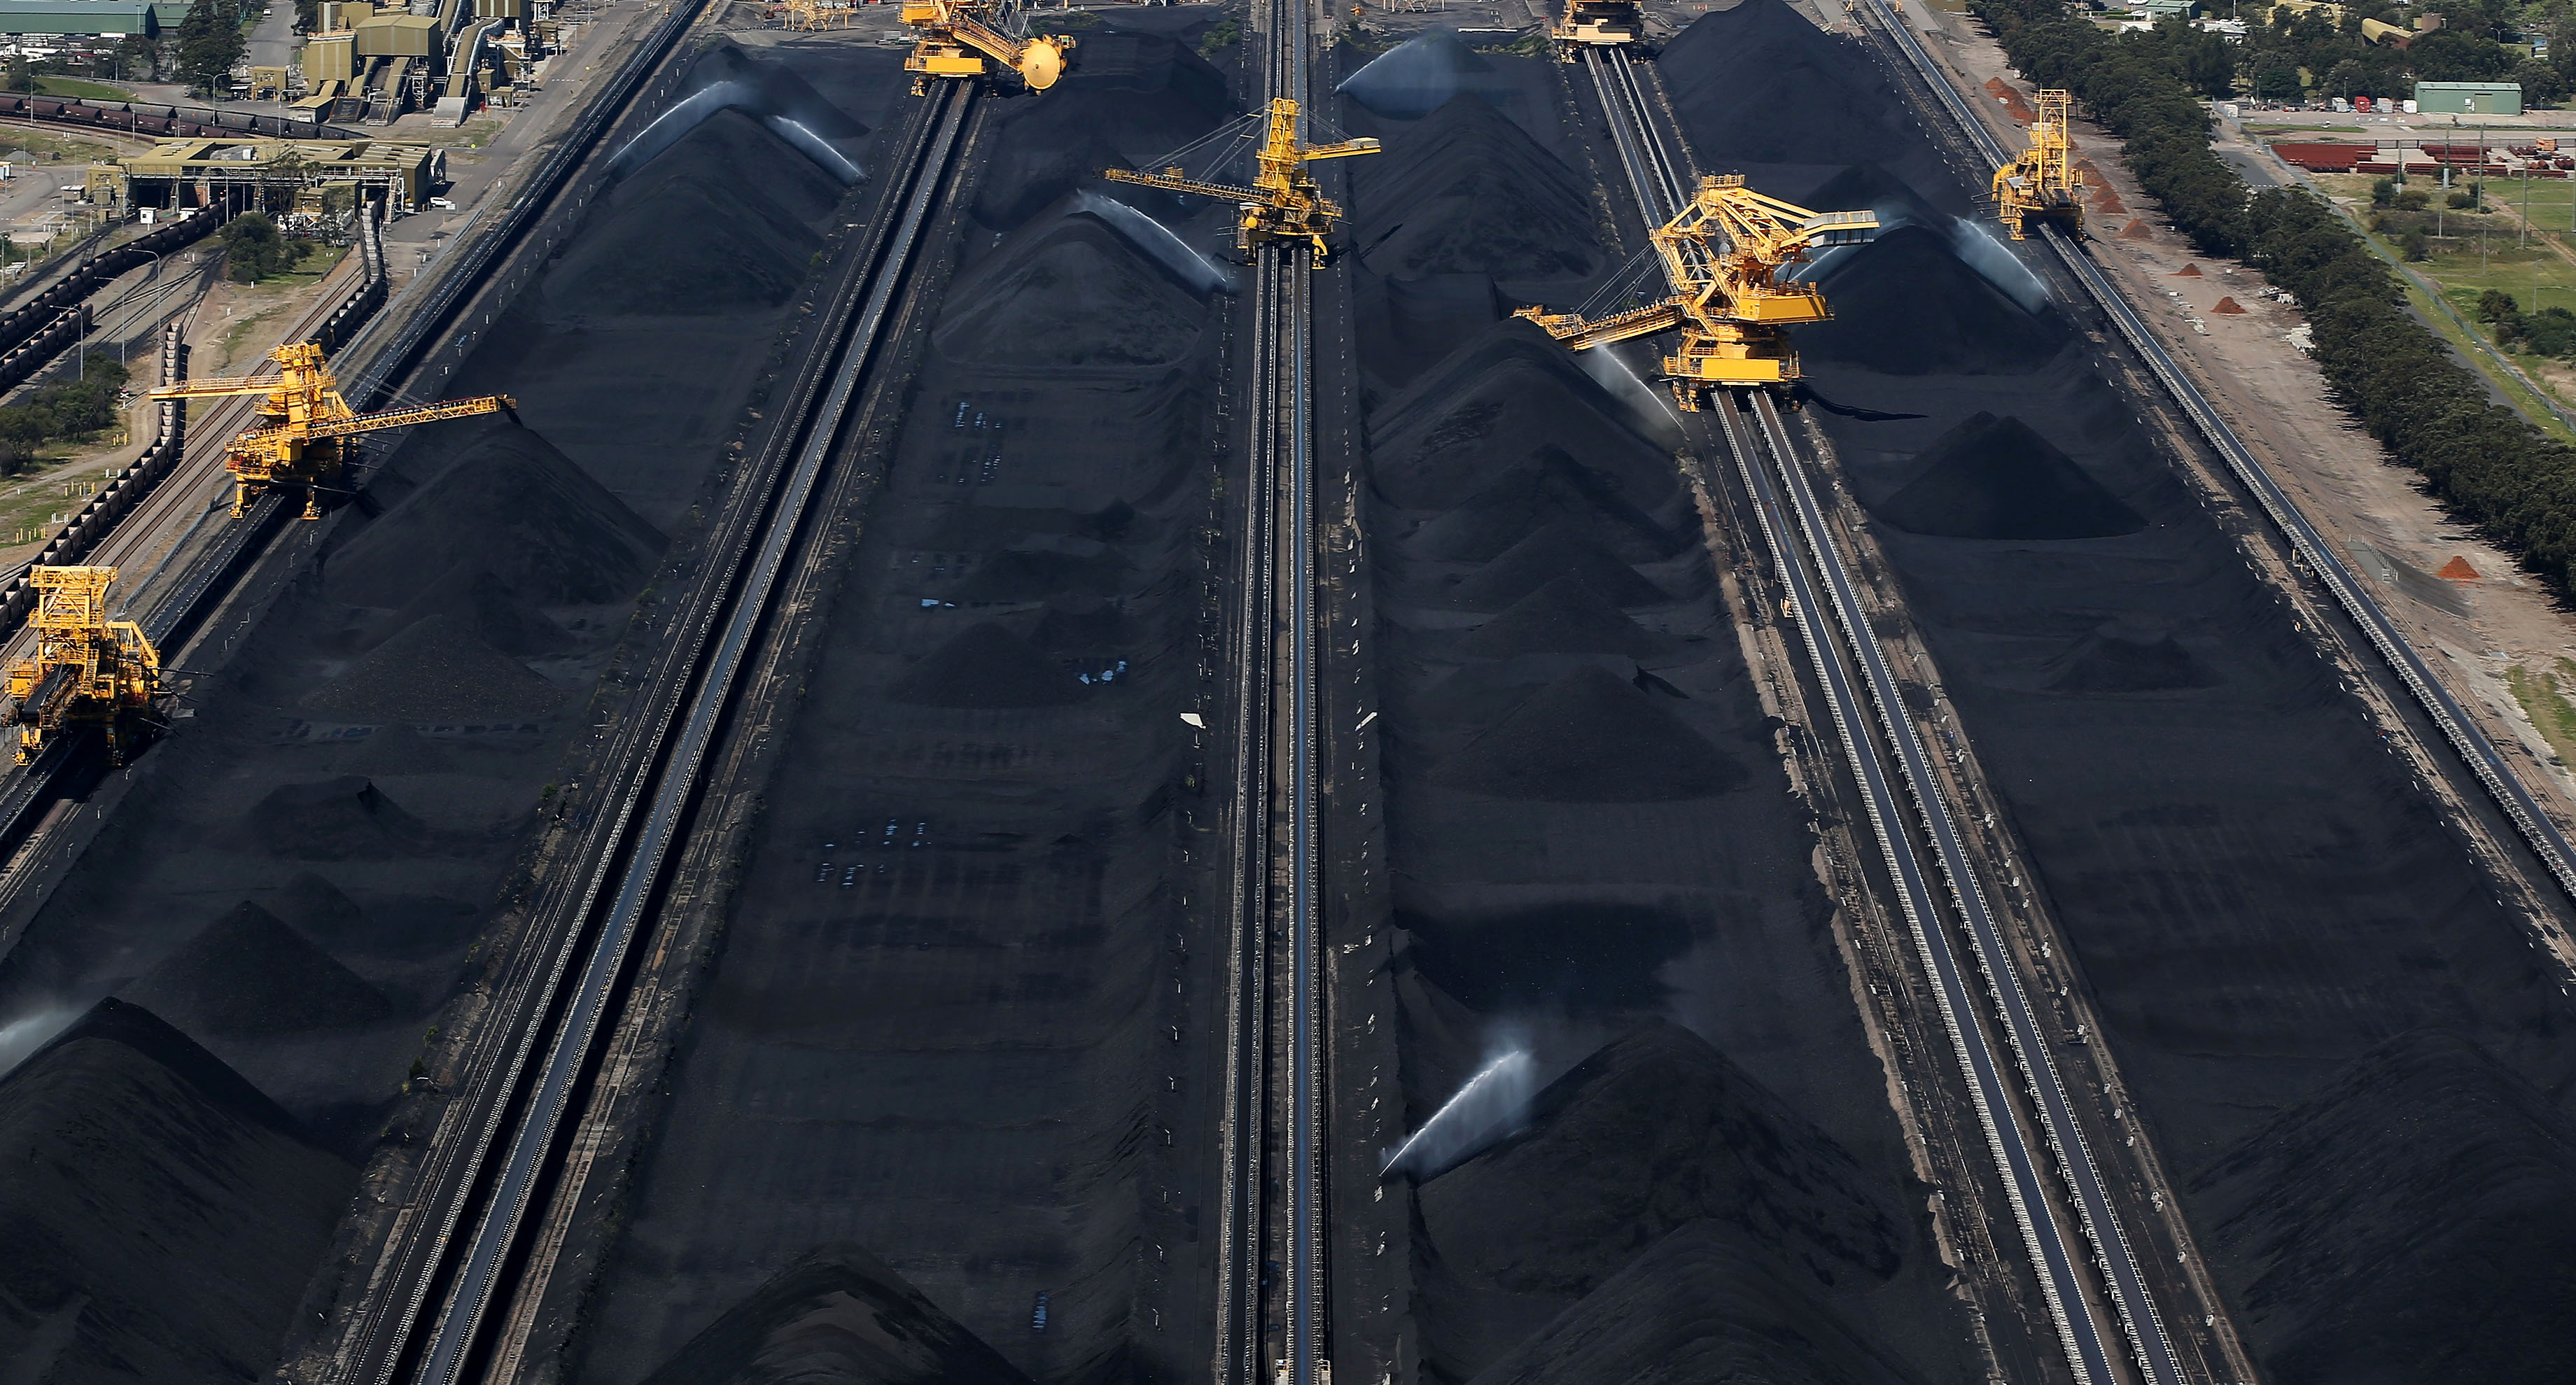 Stacker-reclaimers operate next to stockpiles of coal in Newcastle, Australia.